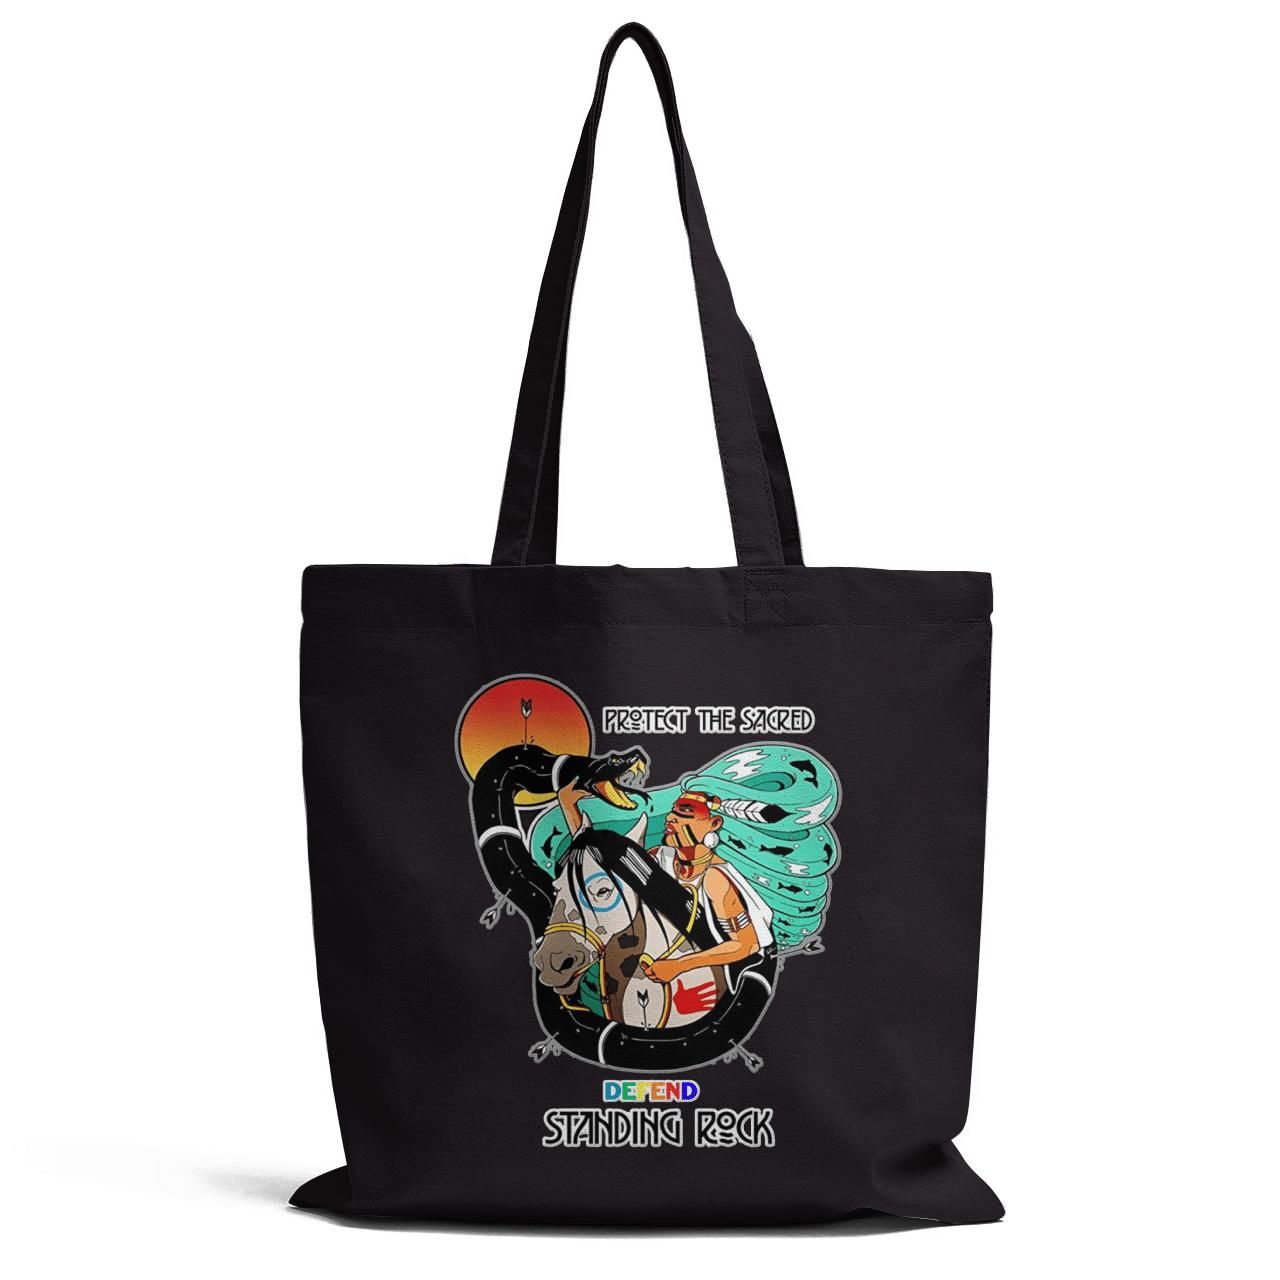 Protect The Sacred Defend Standing Rock Tote Bag